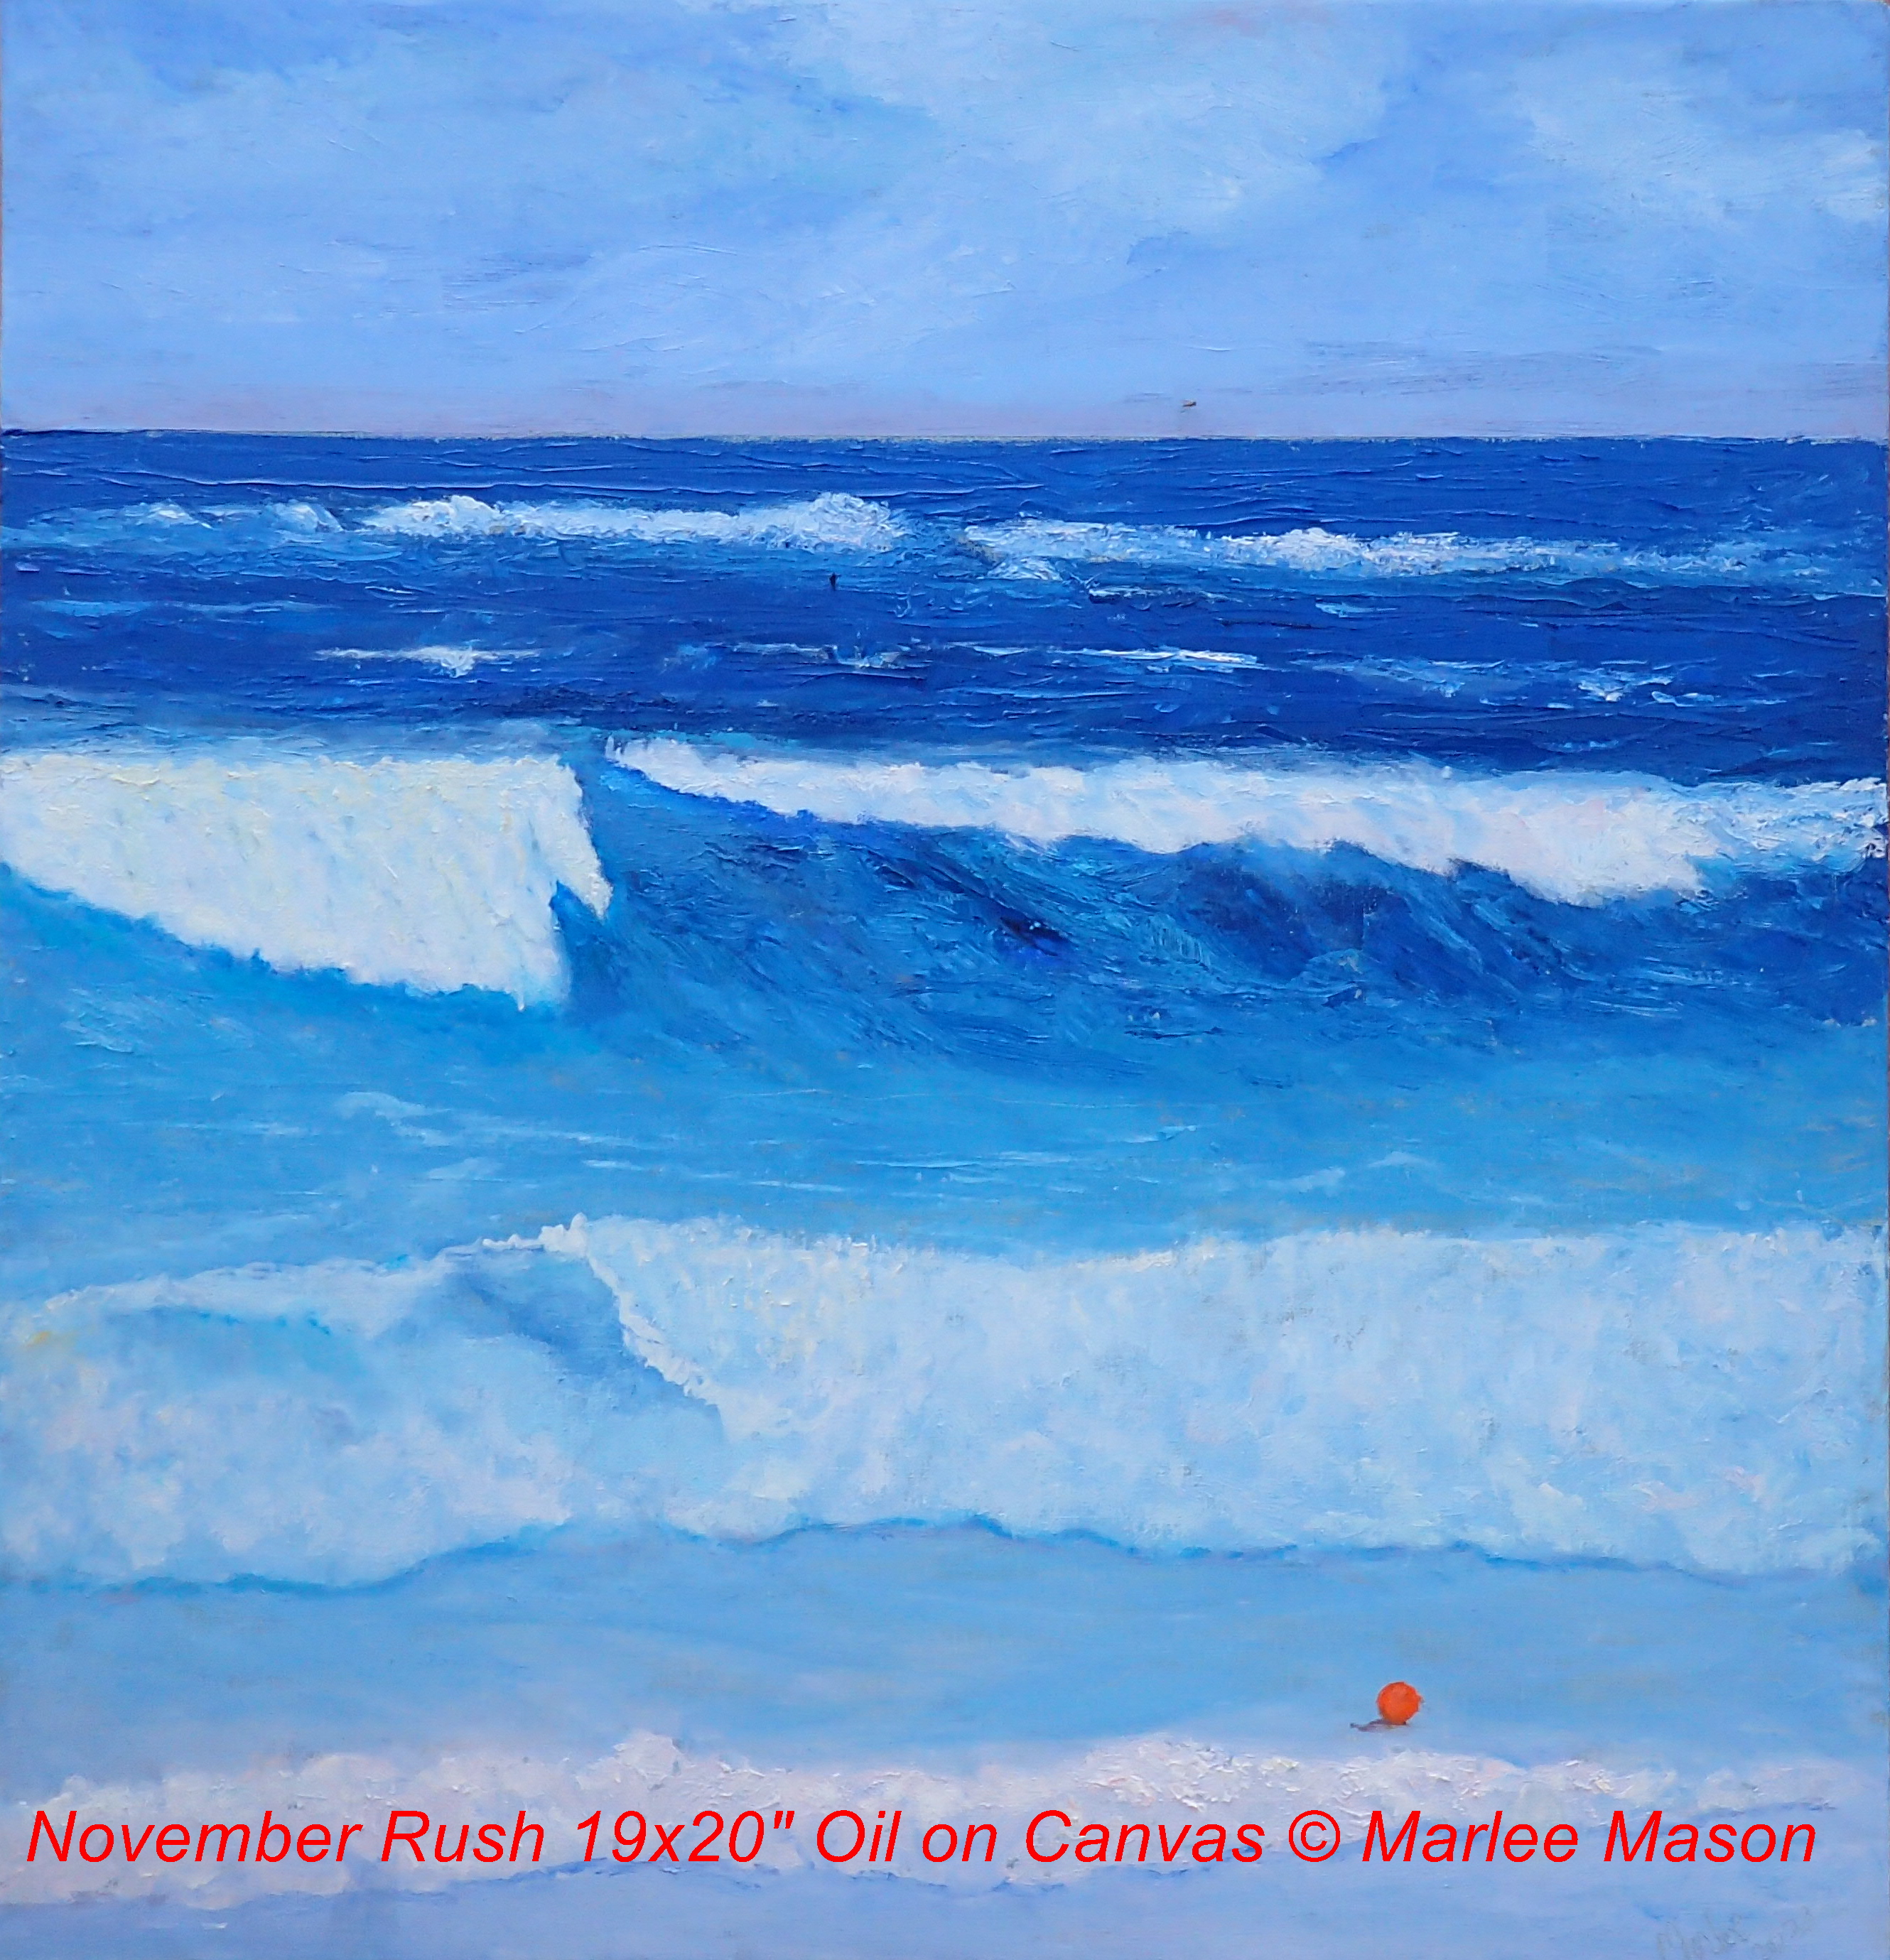 Original Oil Painting on Canvas 19xx20"      This first cold front of the season brings the drama of huge waves crashing against the shore of a miles long beach at Great Guana Cay in Abaco.  The cool 